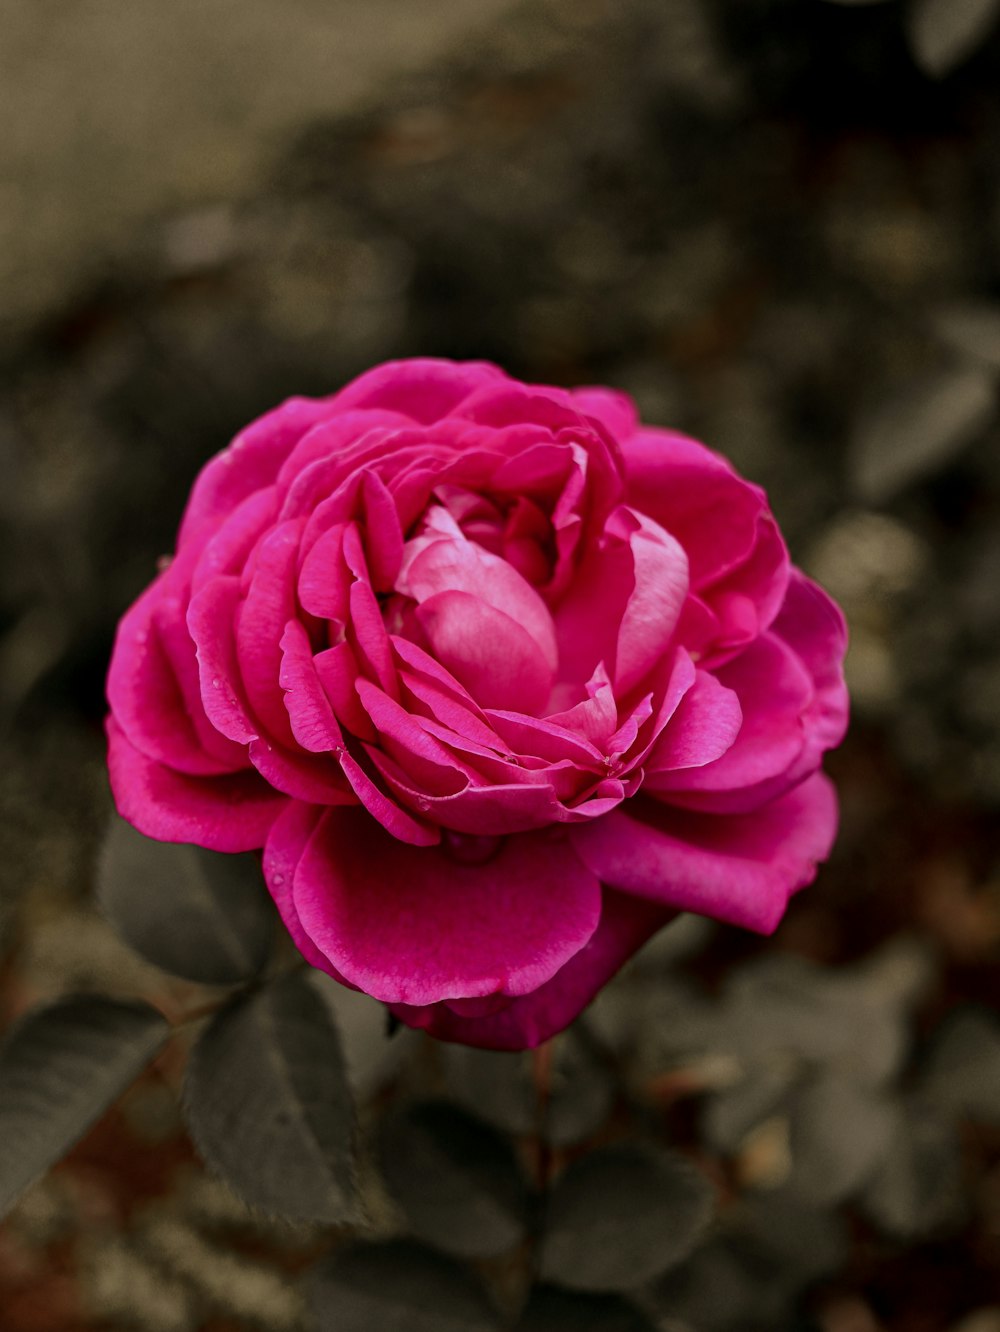 a pink rose with many petals